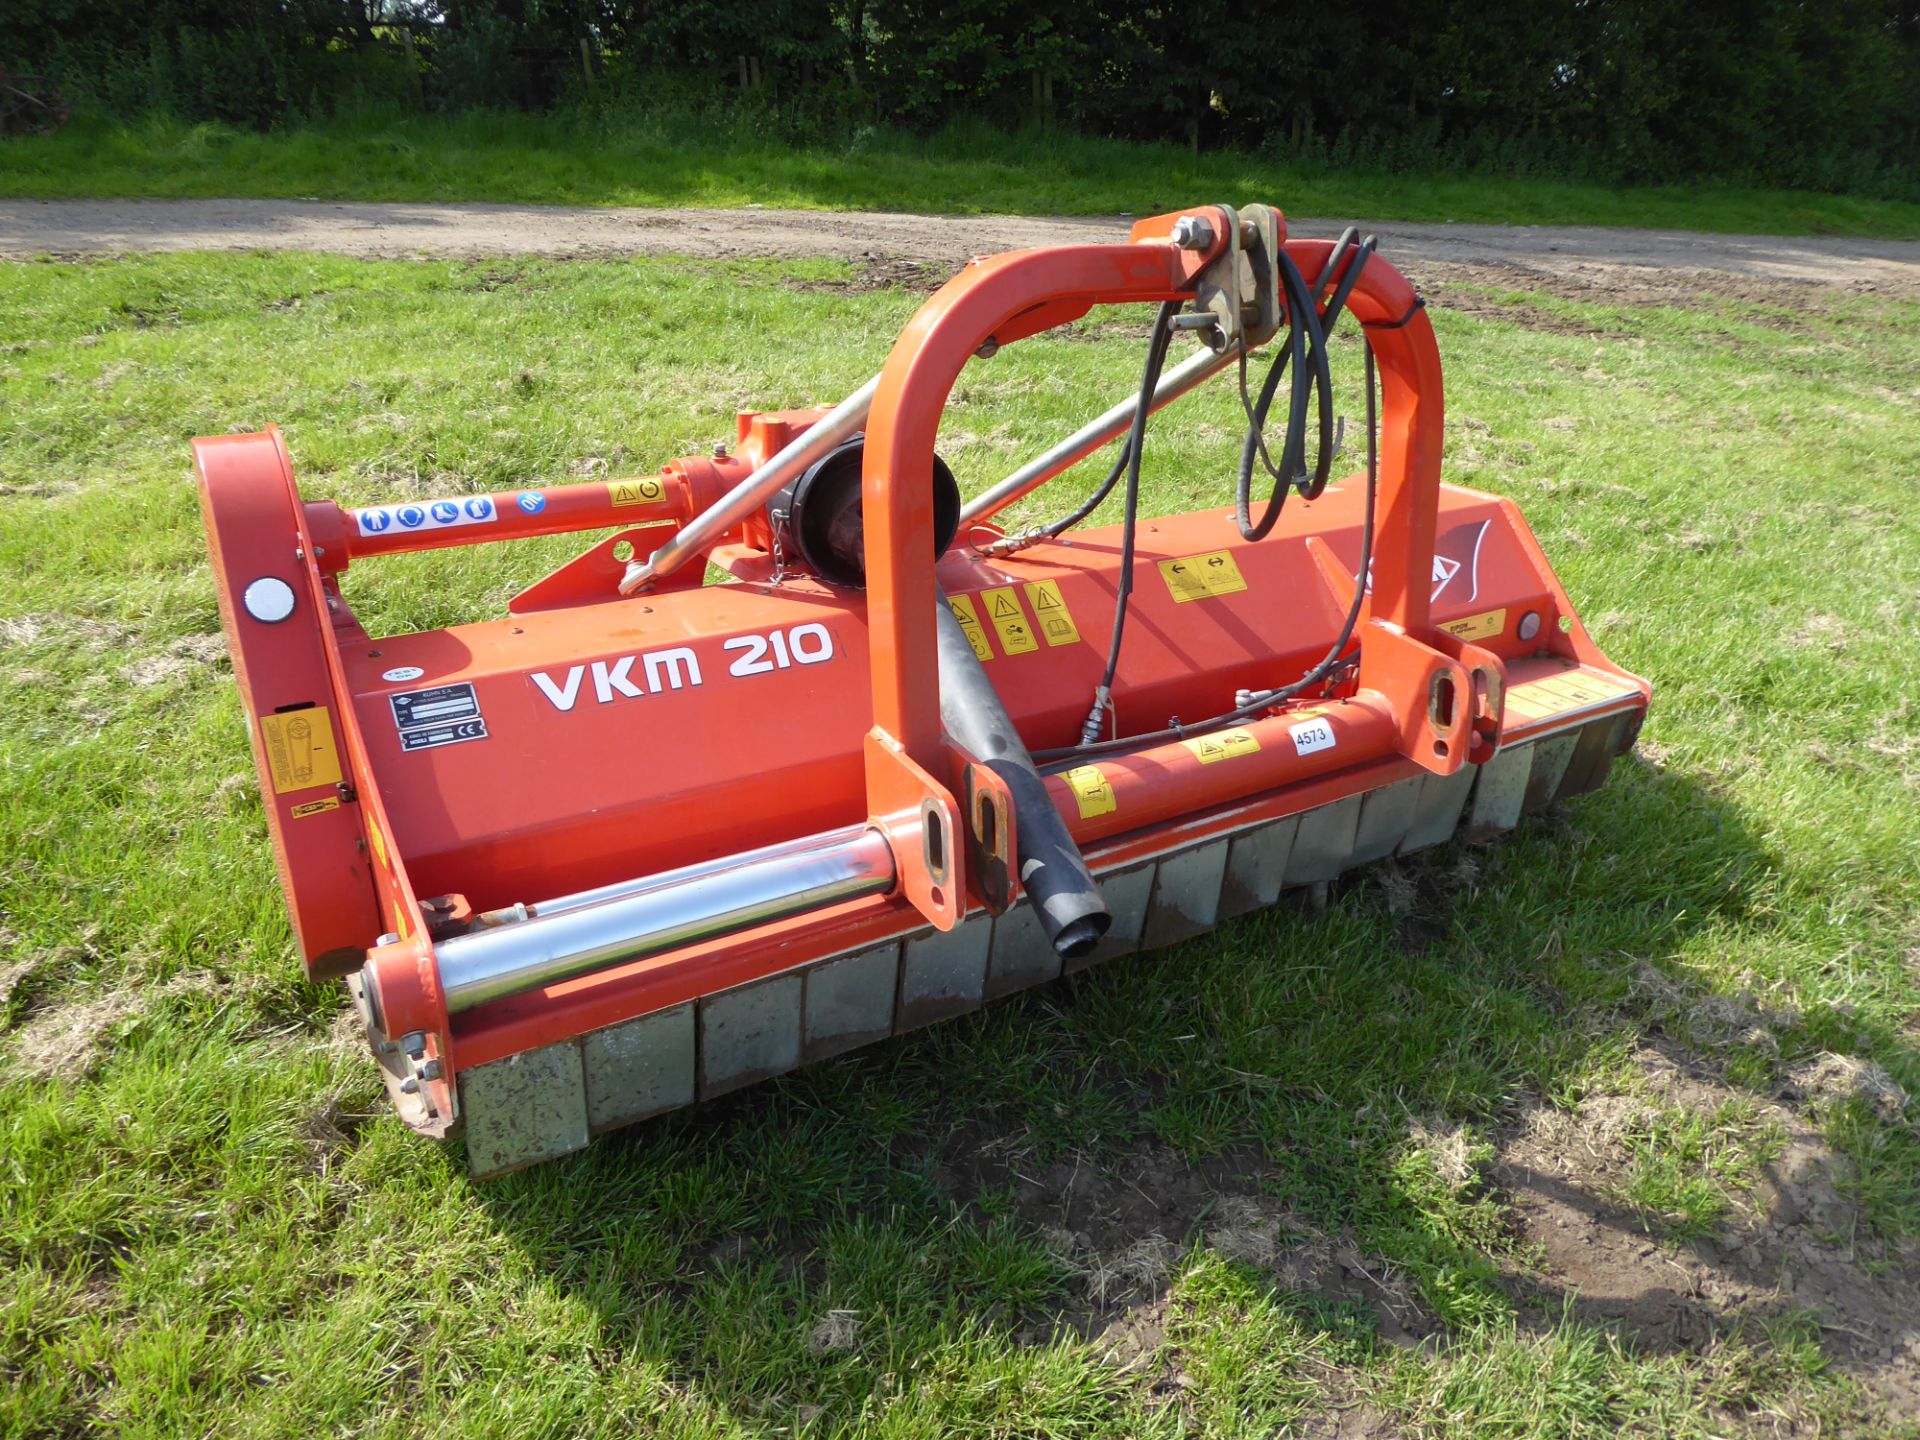 Kuhn 210 VKM flail topper yr 2012 - Image 2 of 2